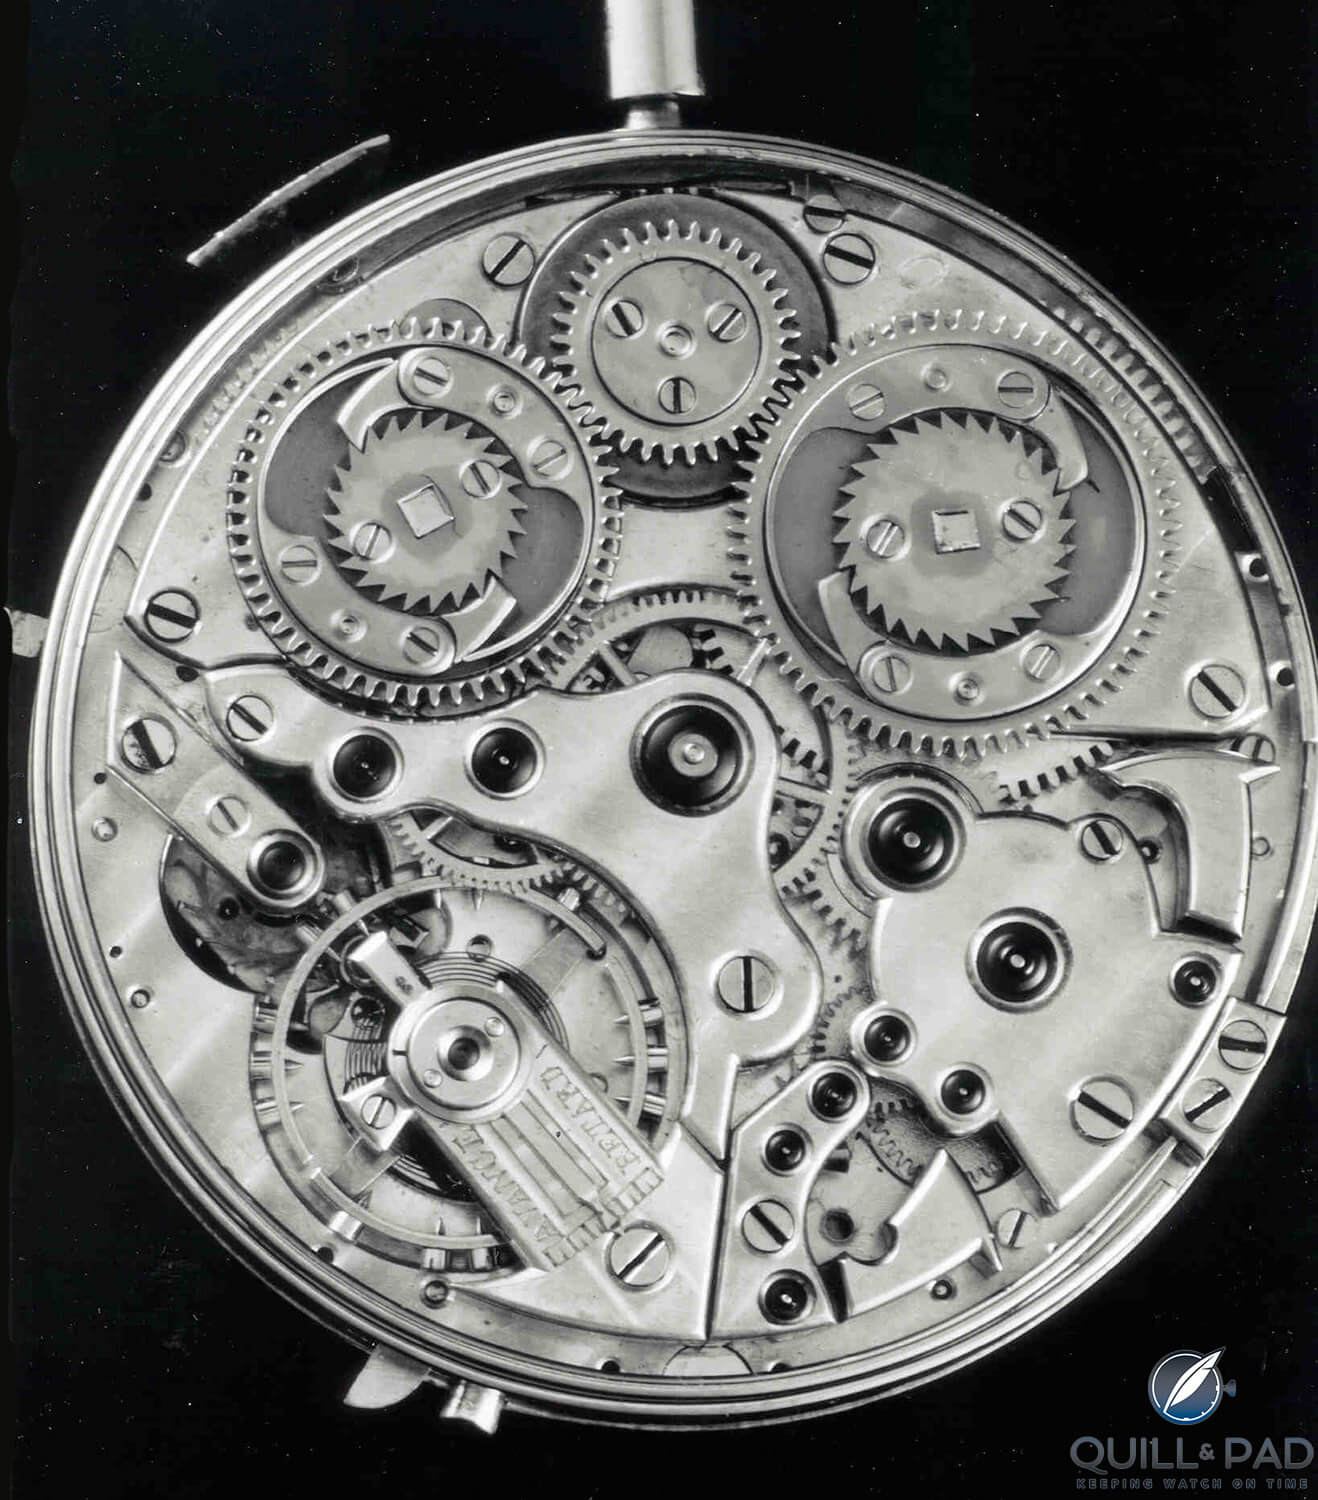 The grand sonnerie minute repeating movement created in the specialist ateliers of Louis-Elysée Piguet as it left Le Brassus in 1892